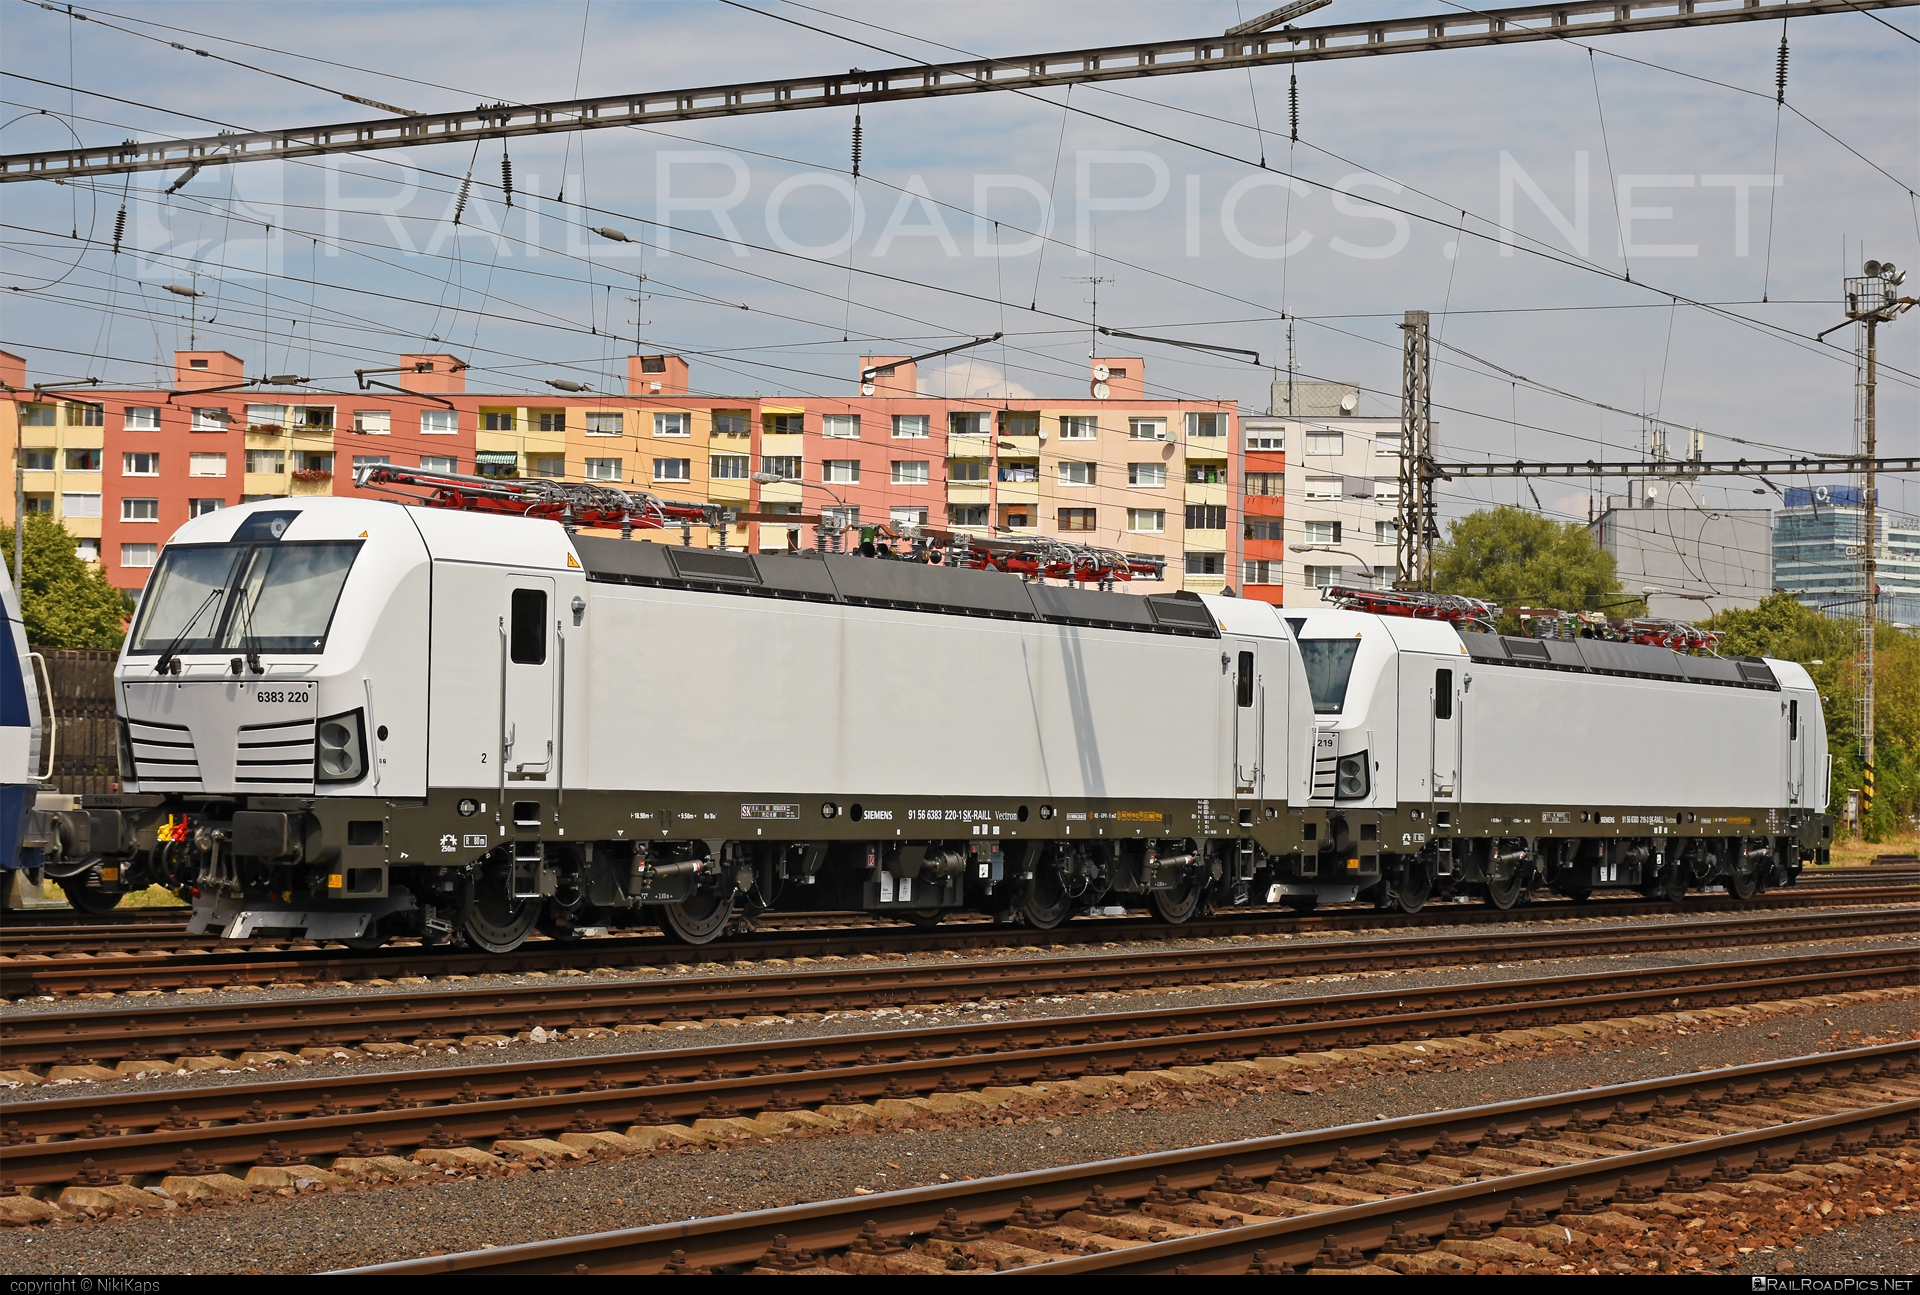 Siemens Vectron MS - 6383 220 operated by LOKORAIL, a.s. #RollingStockLease #RollingStockLeaseSro #budamar #lokorail #lrl #raill #siemens #siemensVectron #siemensVectronMS #vectron #vectronMS